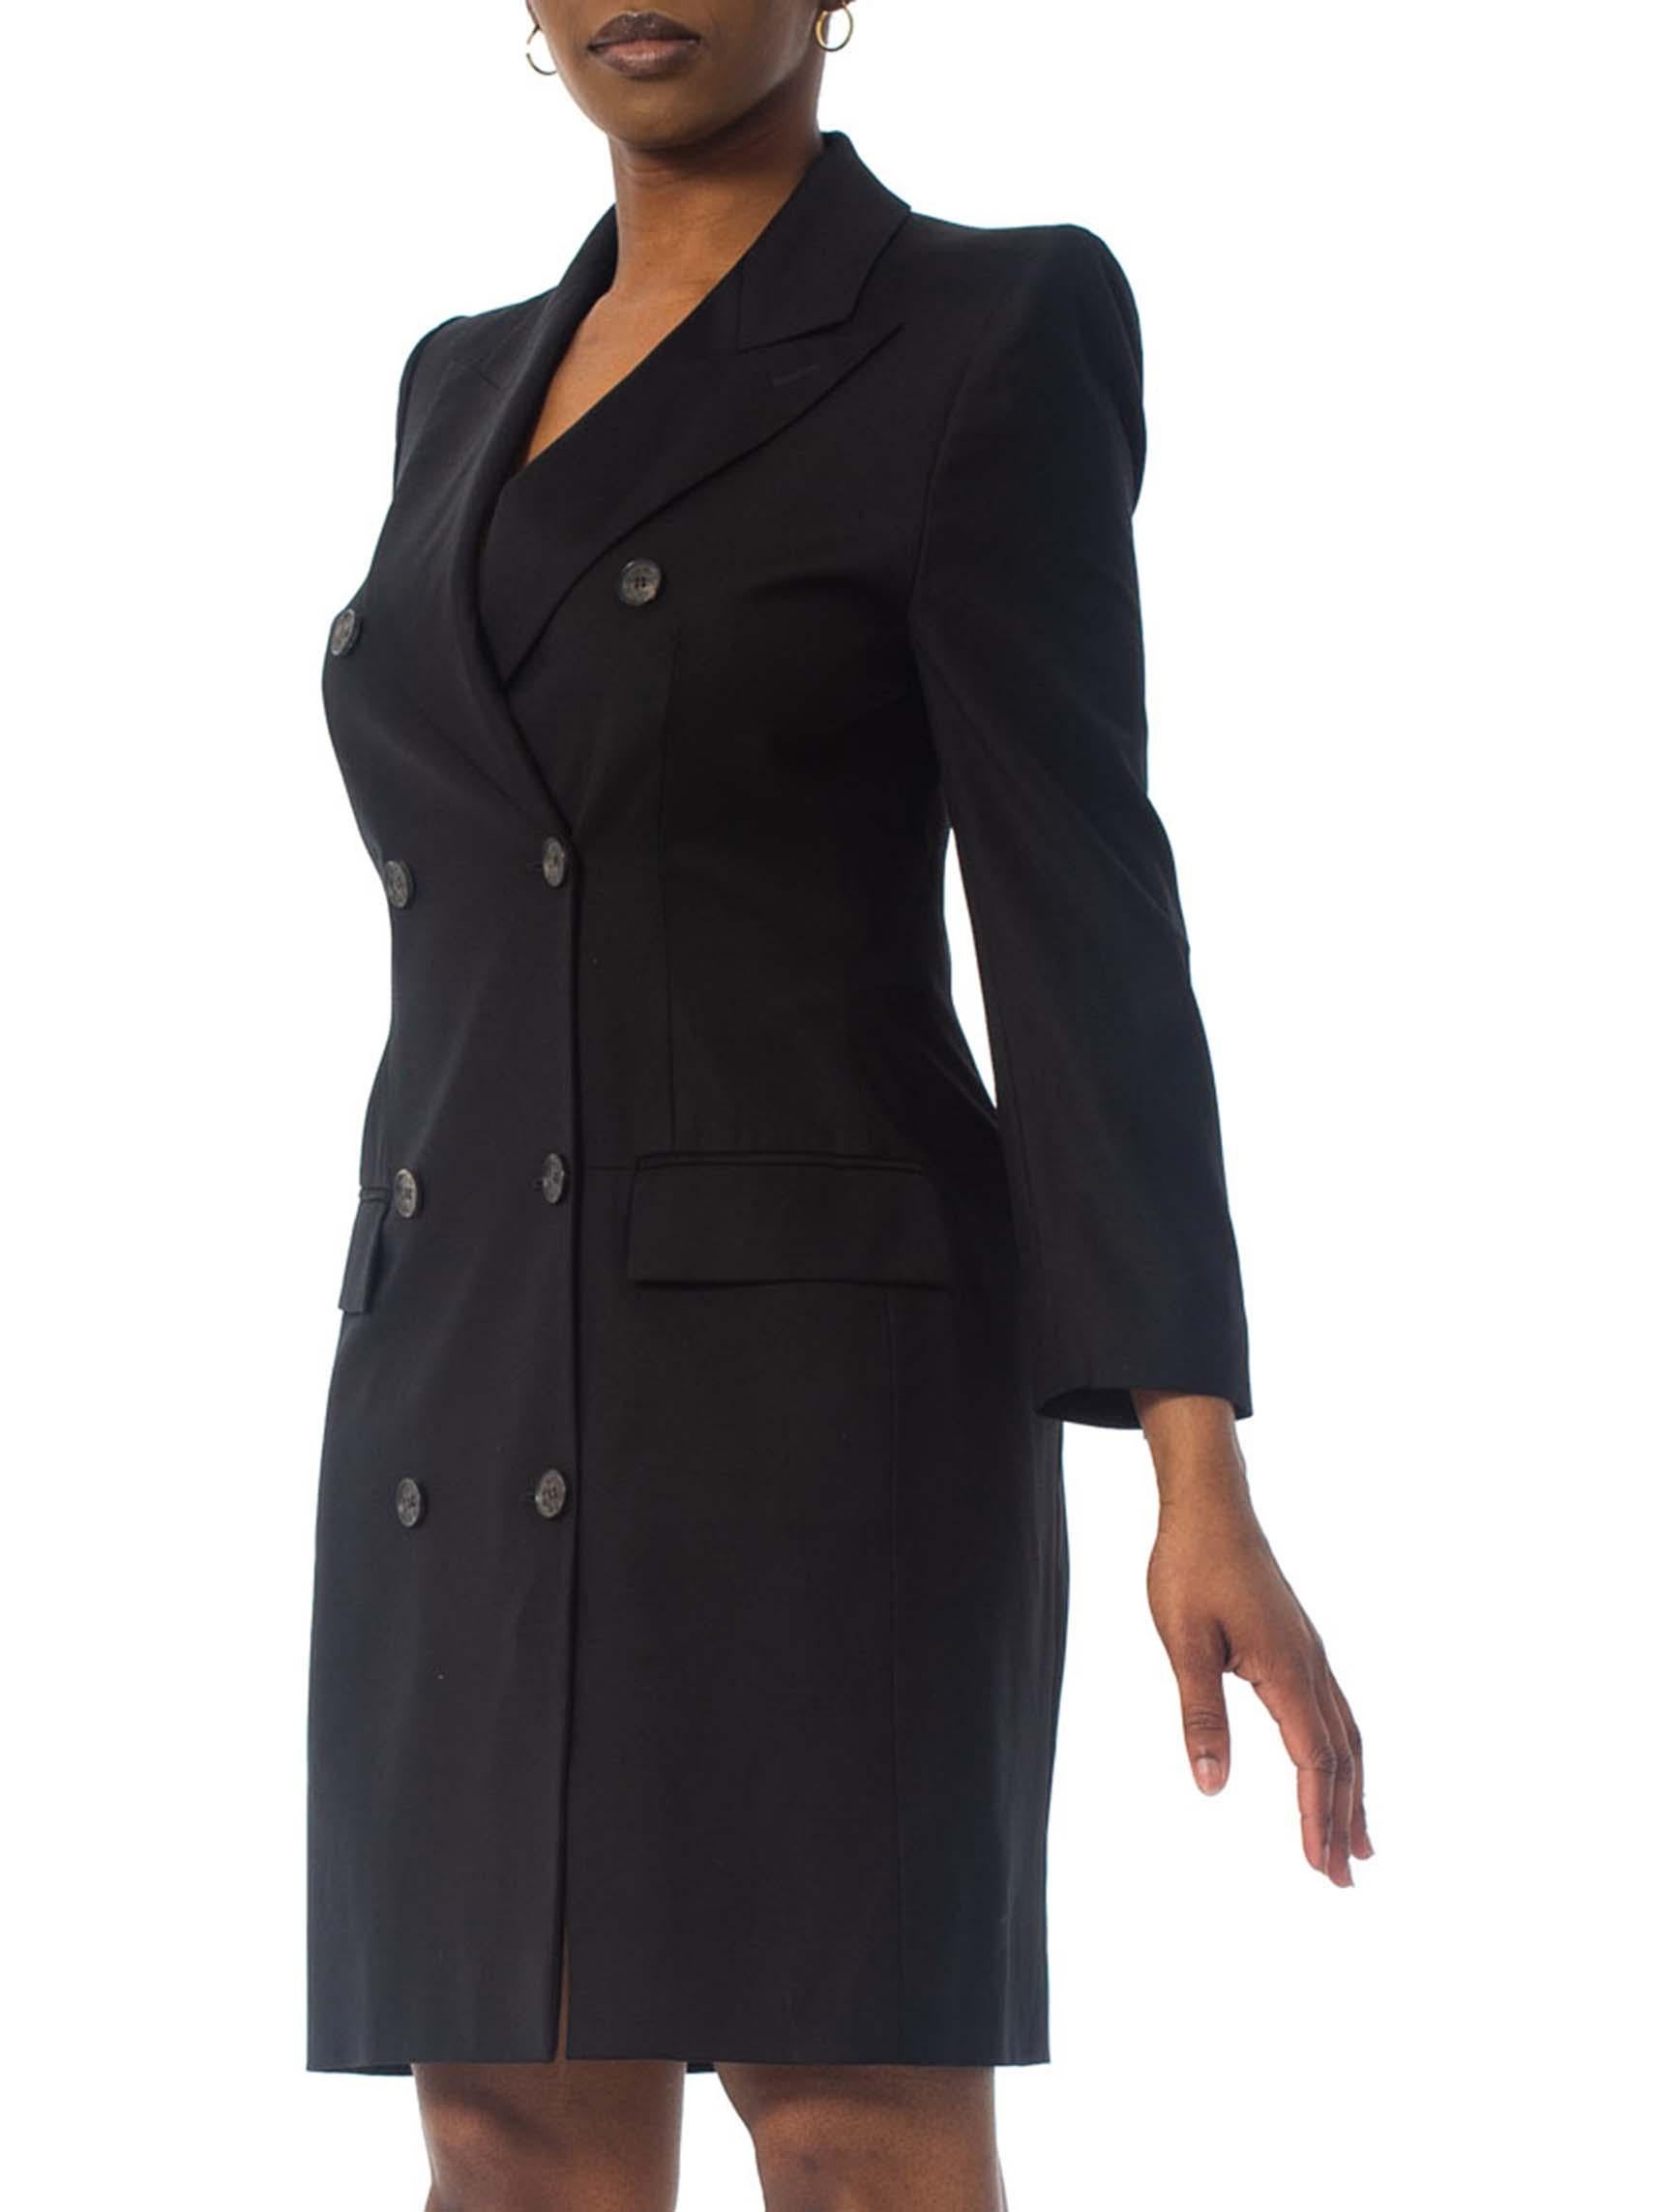 1990S ALEXANDER MCQUEEN GIVENCHY Black Wool Blazer Coat Dress With Slit & Pagod In Excellent Condition In New York, NY